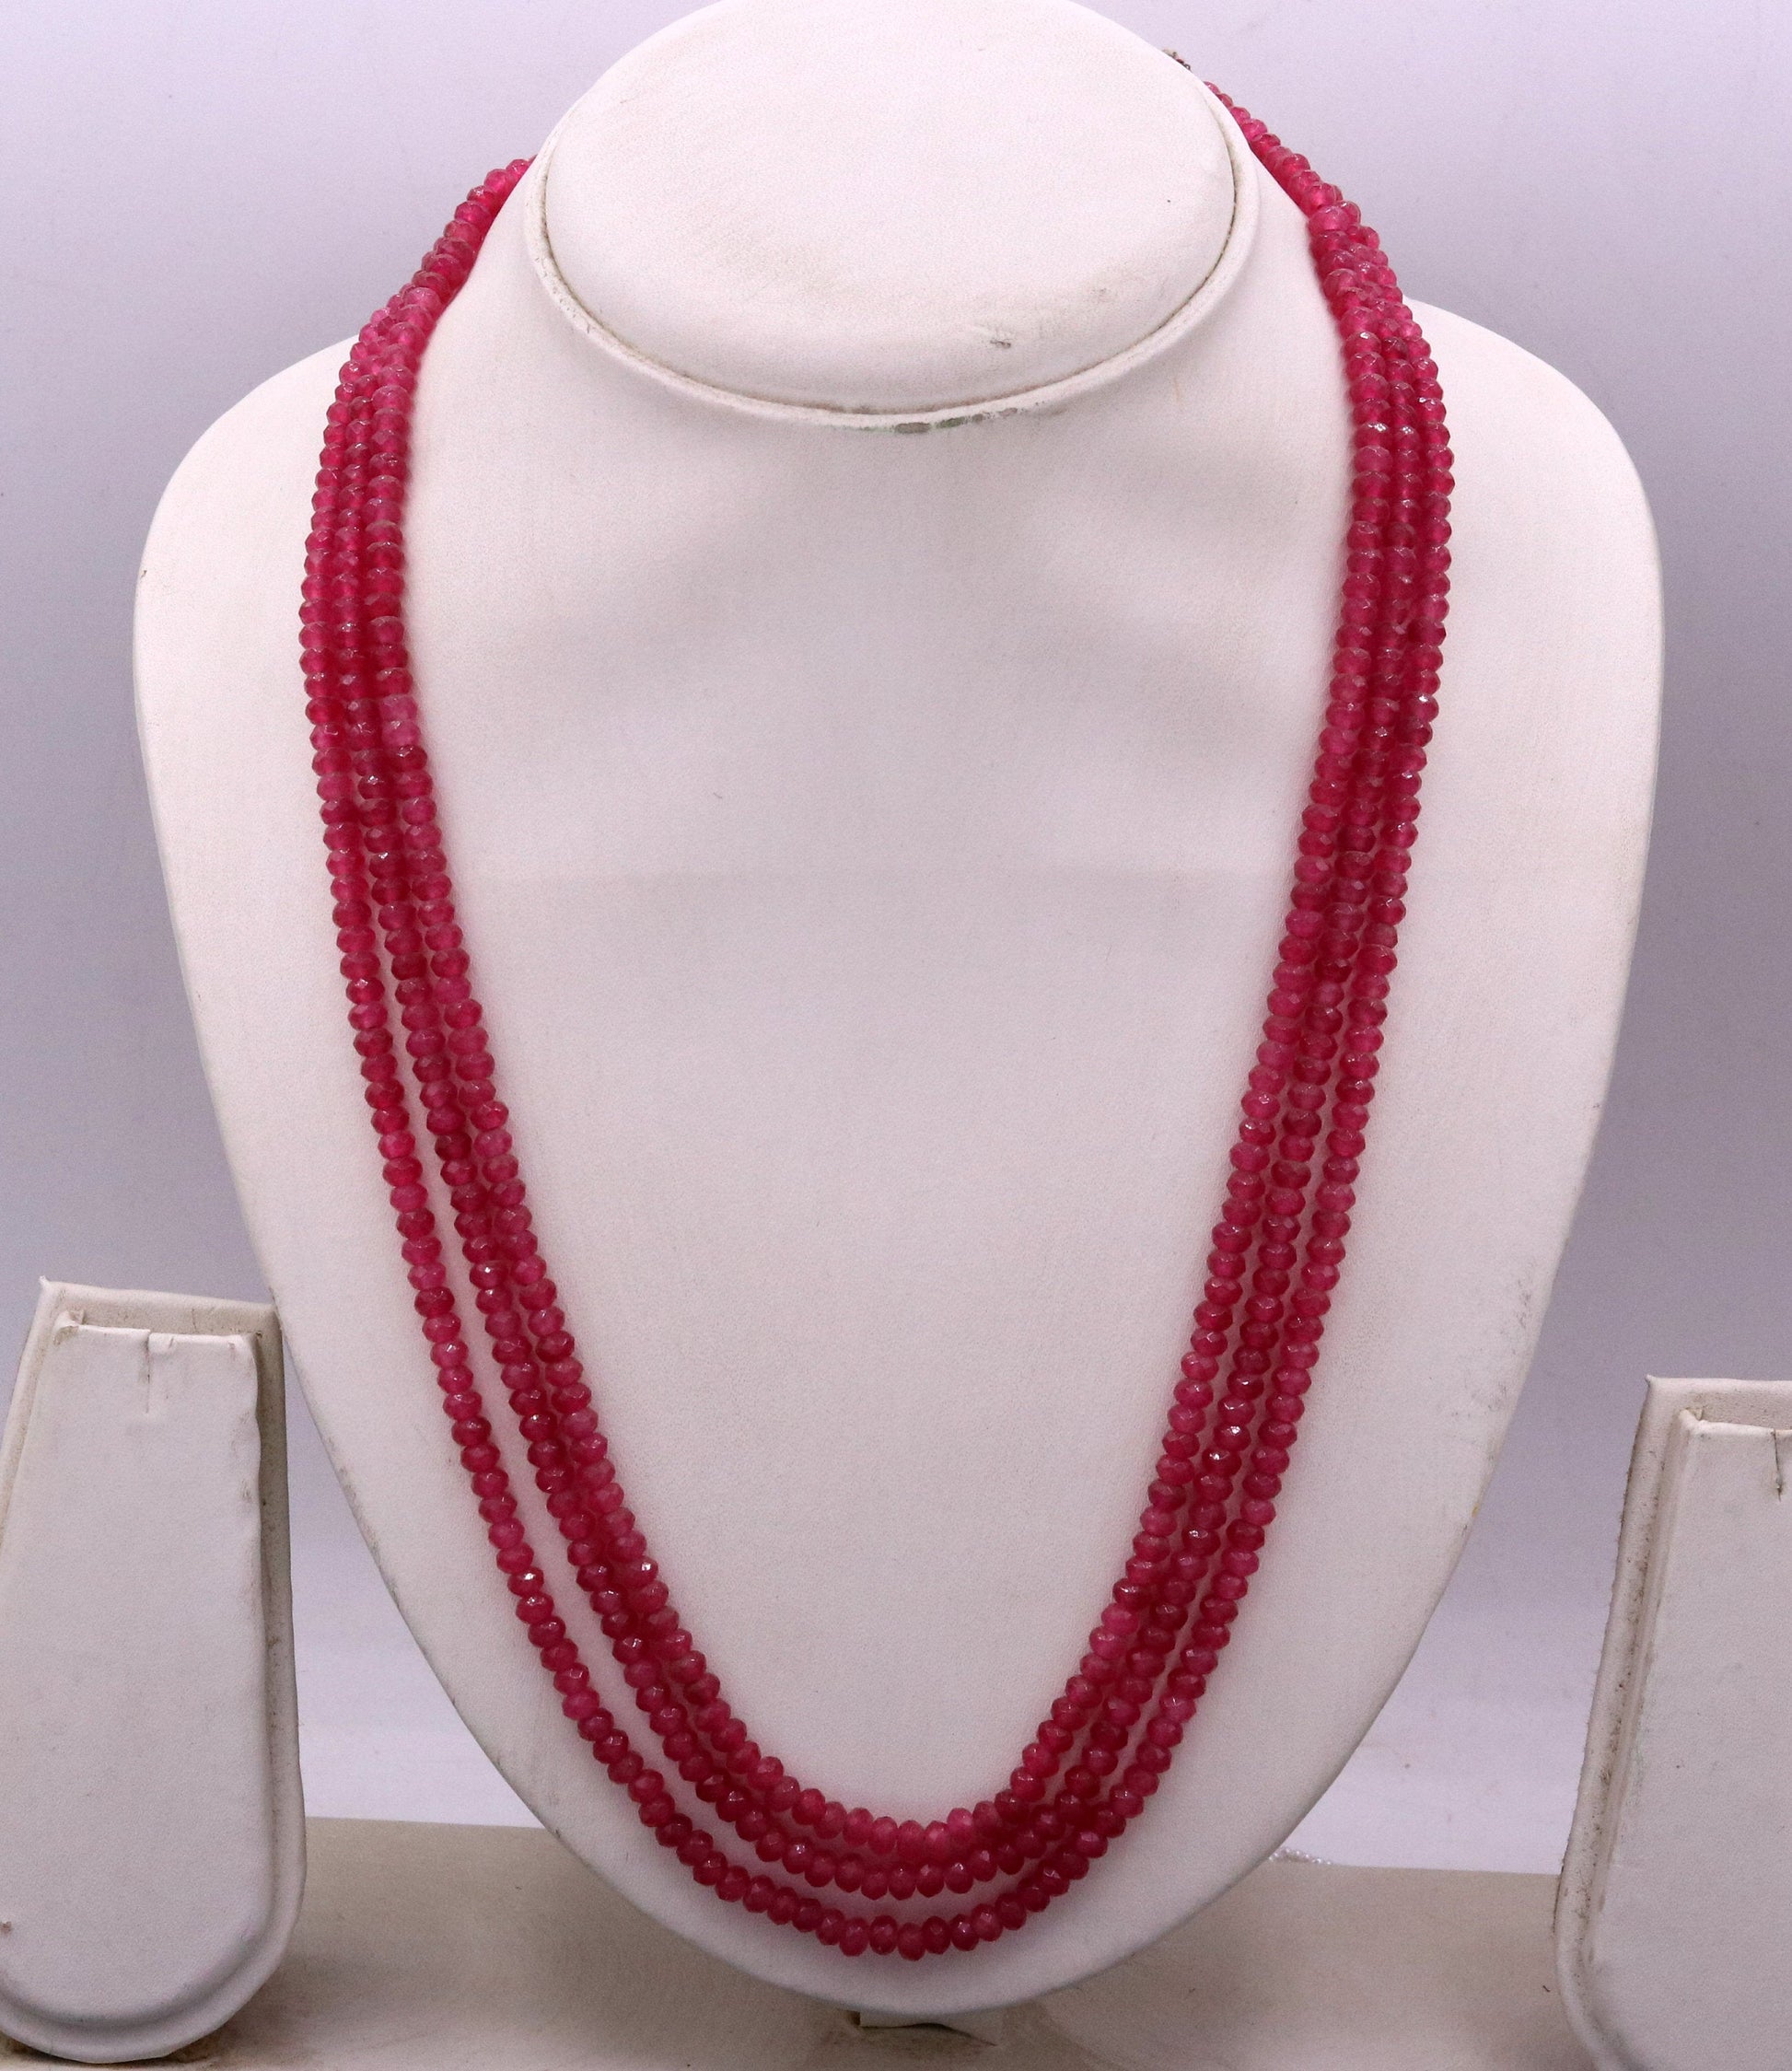 Vintage antique design handmade gorgeous rose pink Quartz 3 line necklace, excellent beaded charm necklace tribal jewelry from india qd03 - TRIBAL ORNAMENTS